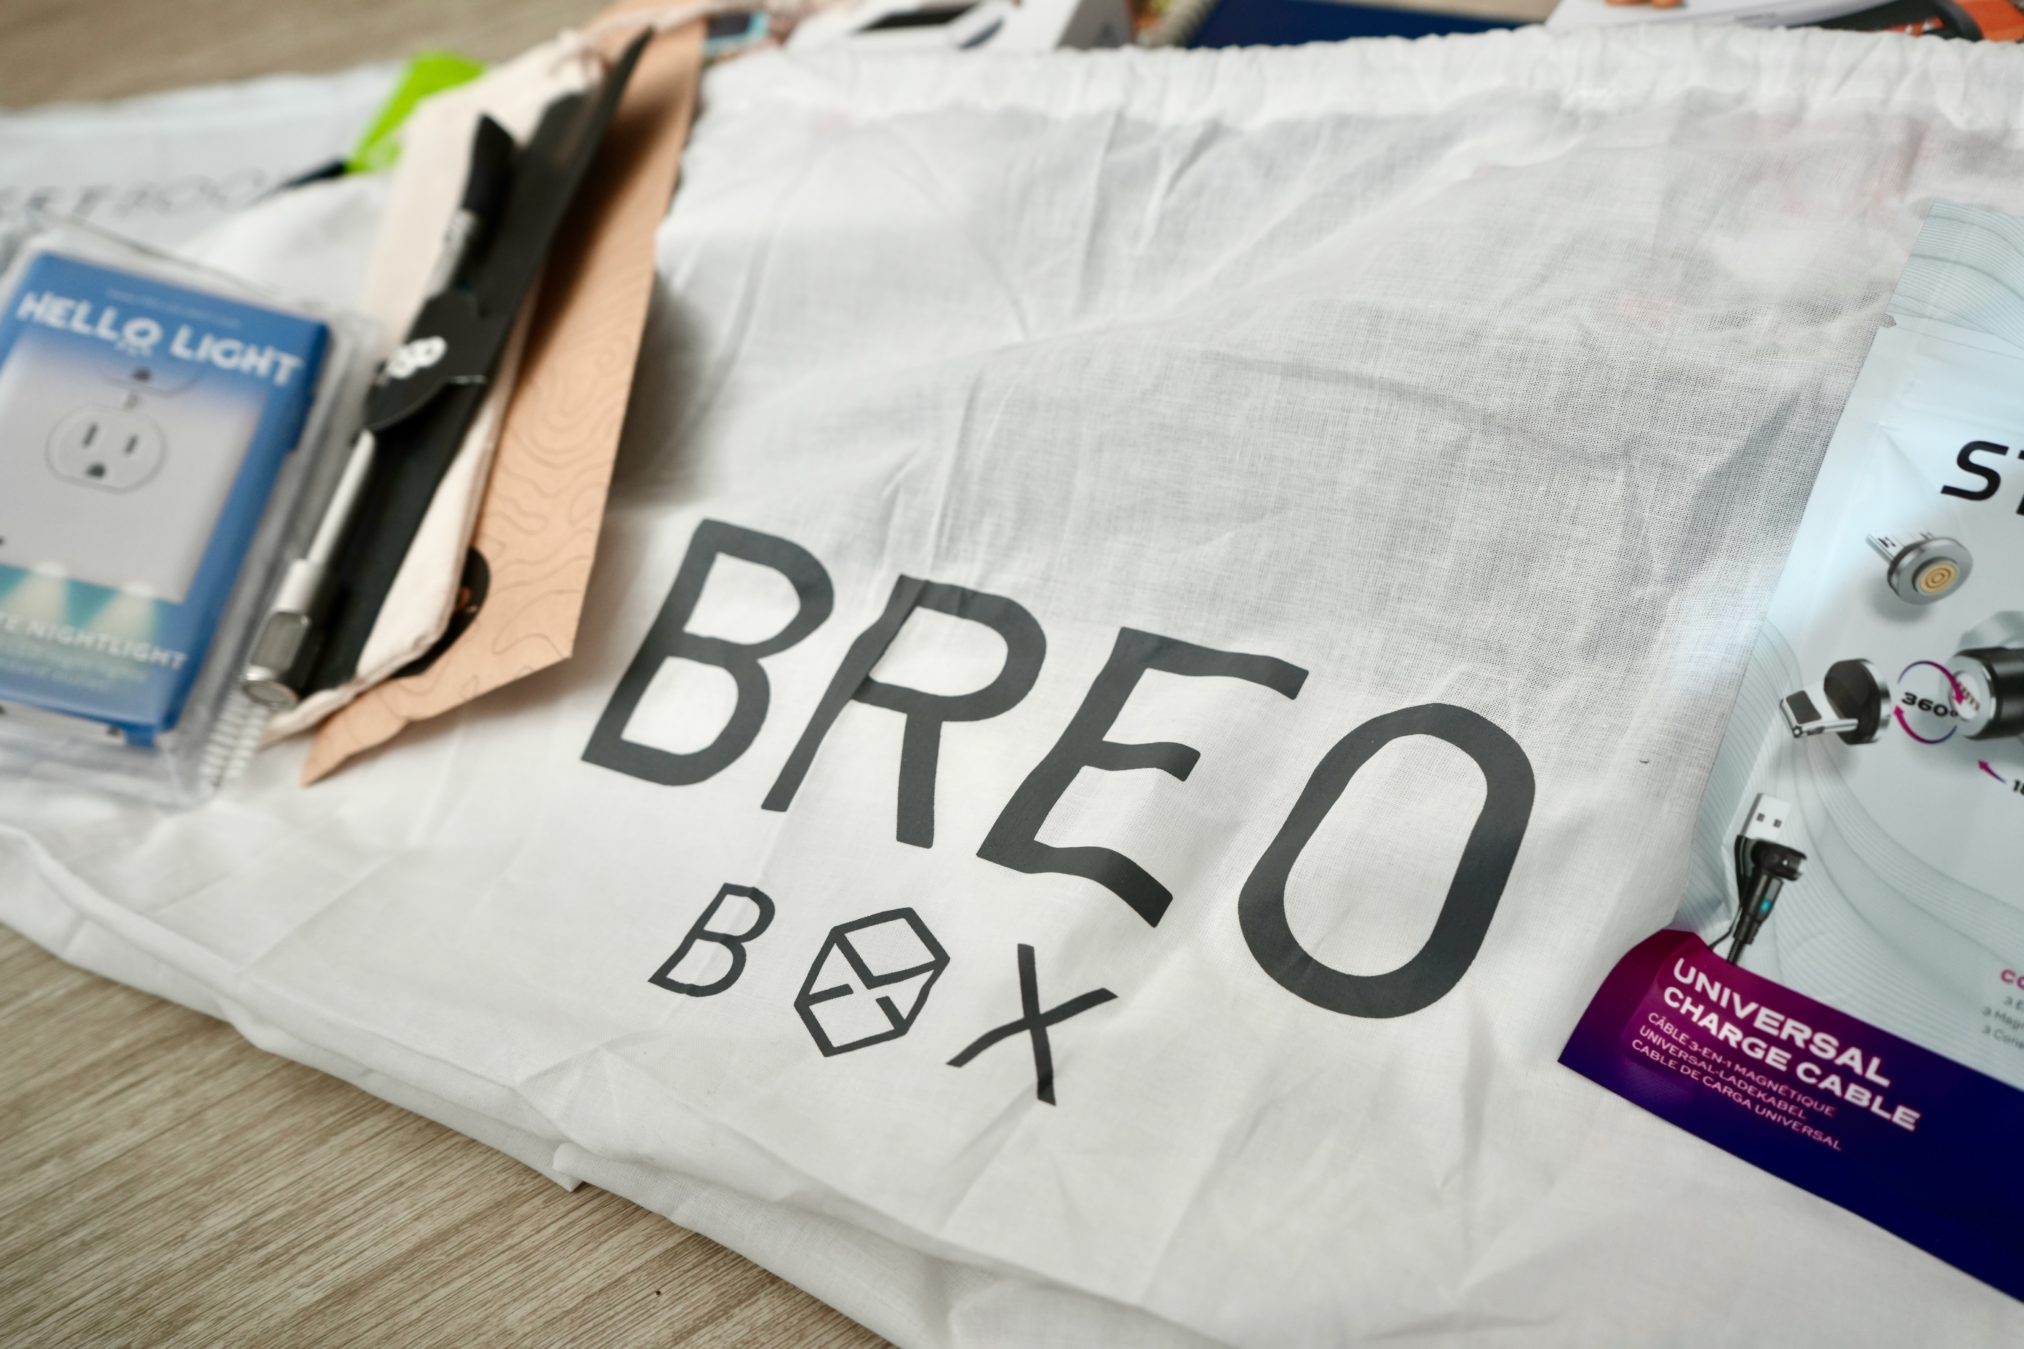 BREO Box Review - Is This Subscription A Waste Of Money?